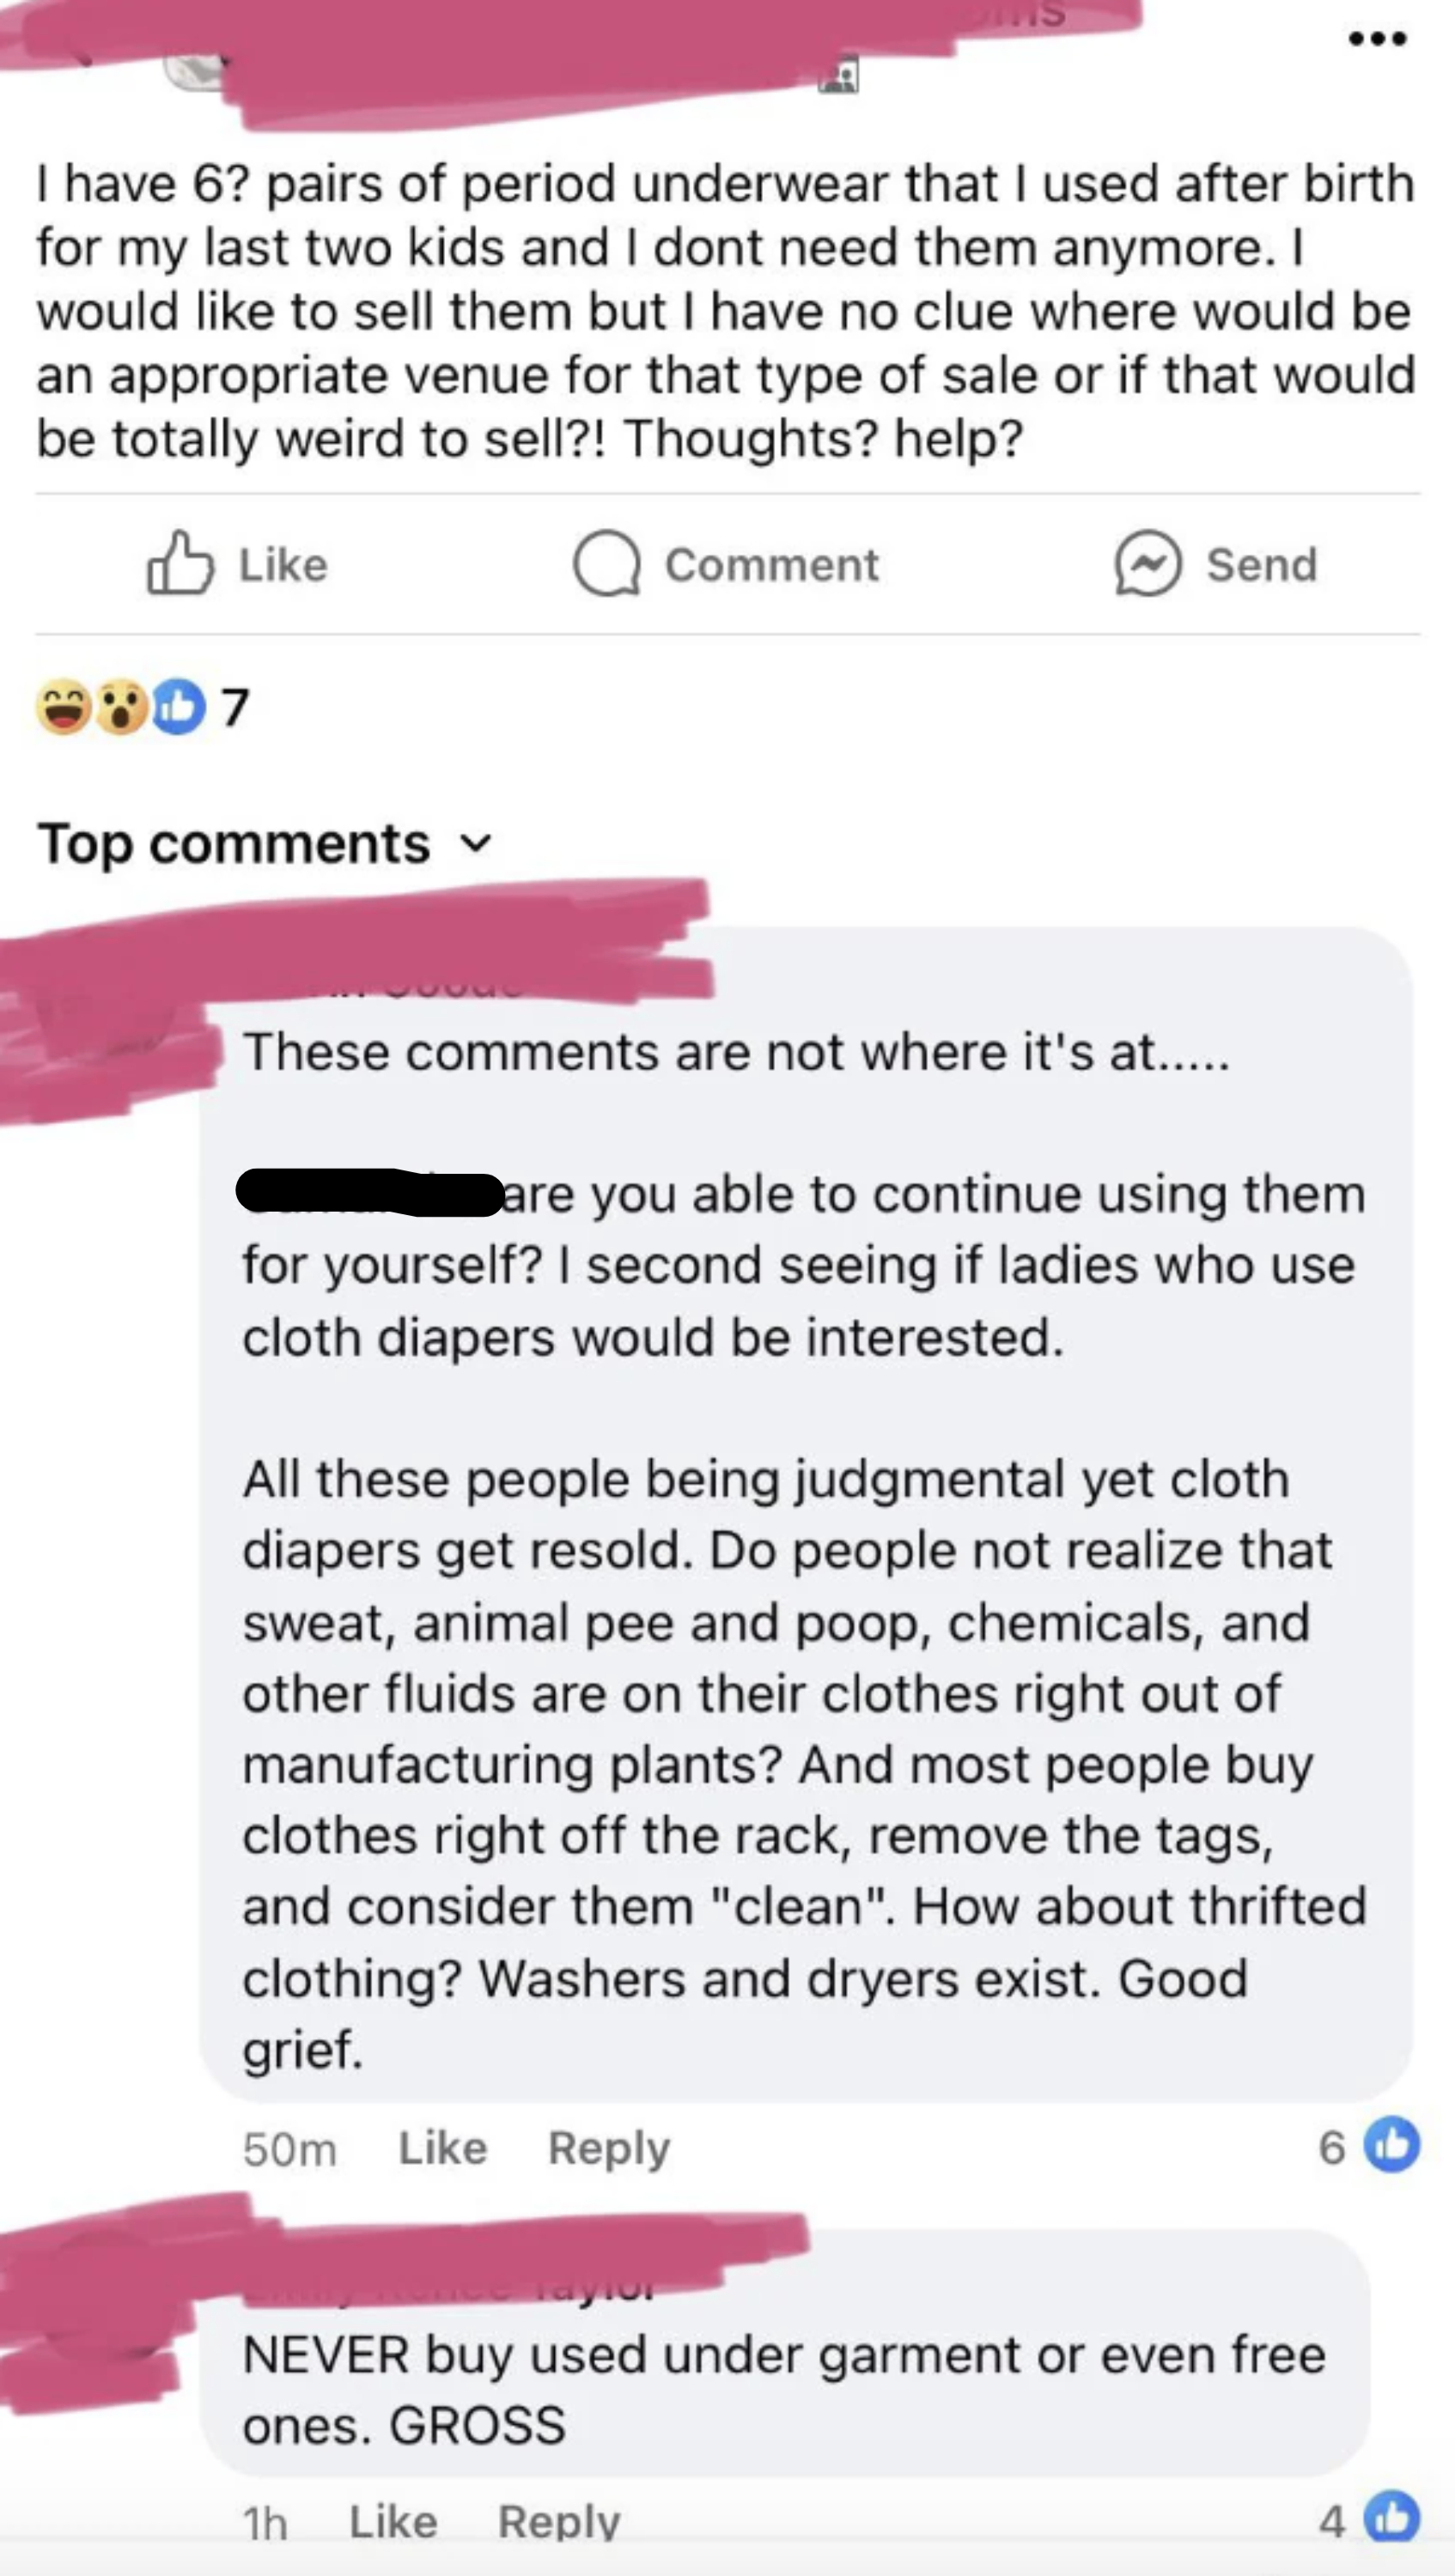 Facebook screenshot of a user discussing selling used period underwear; comments discuss the idea with mixed reactions